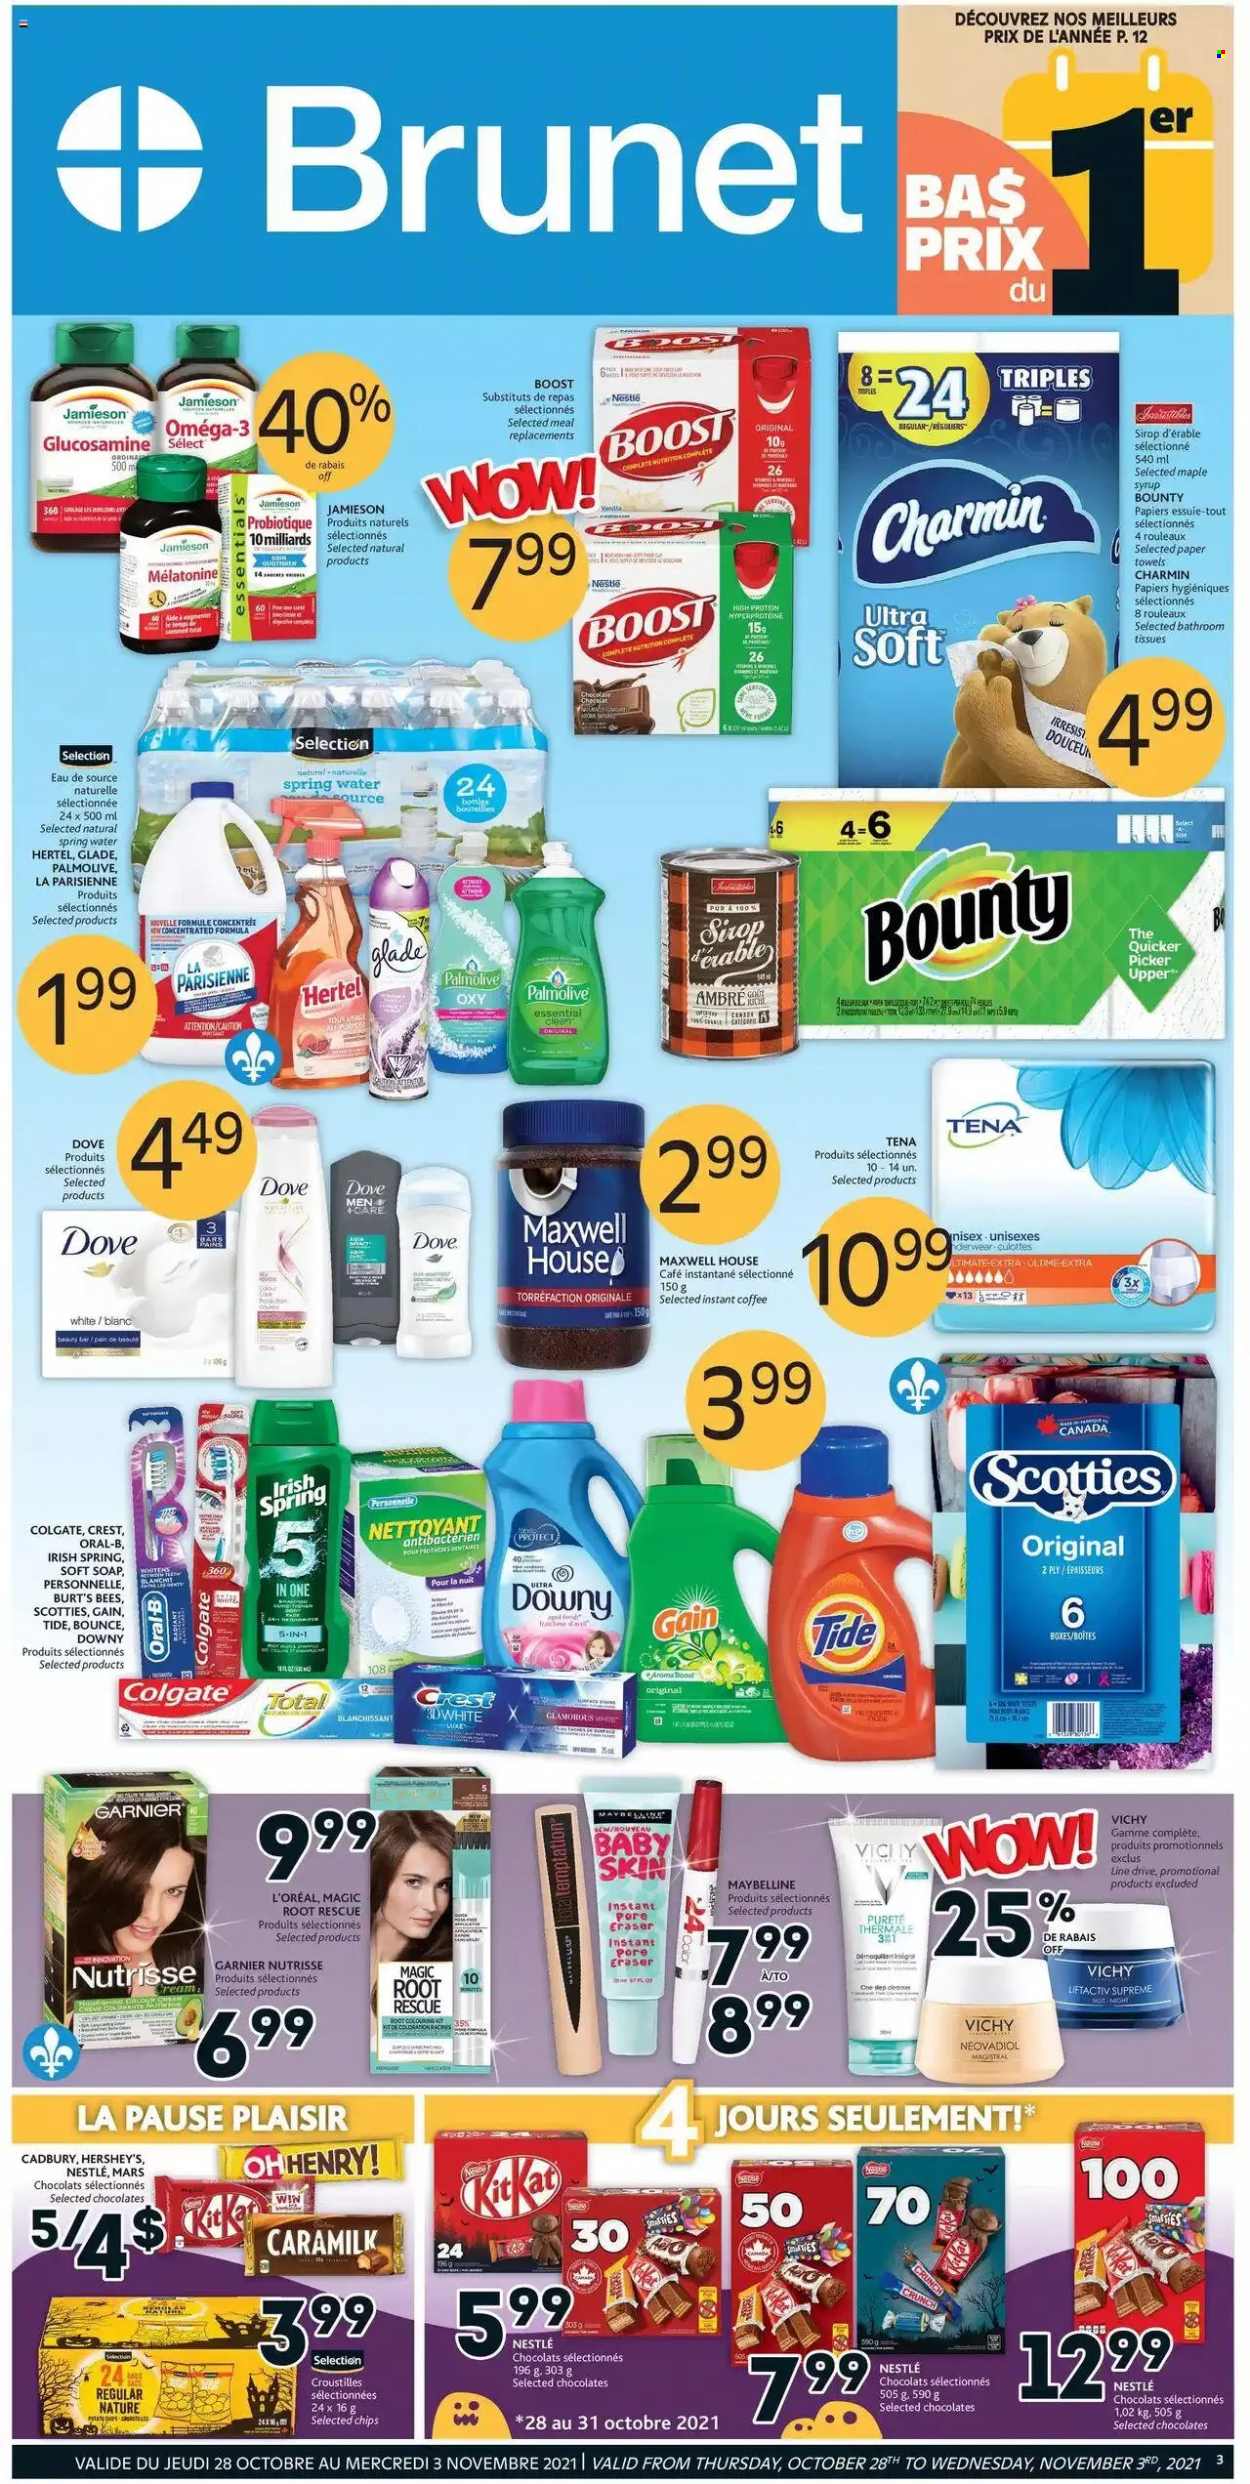 thumbnail - Brunet Flyer - October 28, 2021 - November 03, 2021 - Sales products - toilet paper, Bounty, tissues, kitchen towels, paper towels, Charmin, Gain, Tide, Bounce, Vichy, Palmolive, soap, Crest, L’Oréal, glucosamine, Omega-3, syrup, Nestlé, Dove, Colgate, Garnier, Maybelline, Oral-B. Page 1.